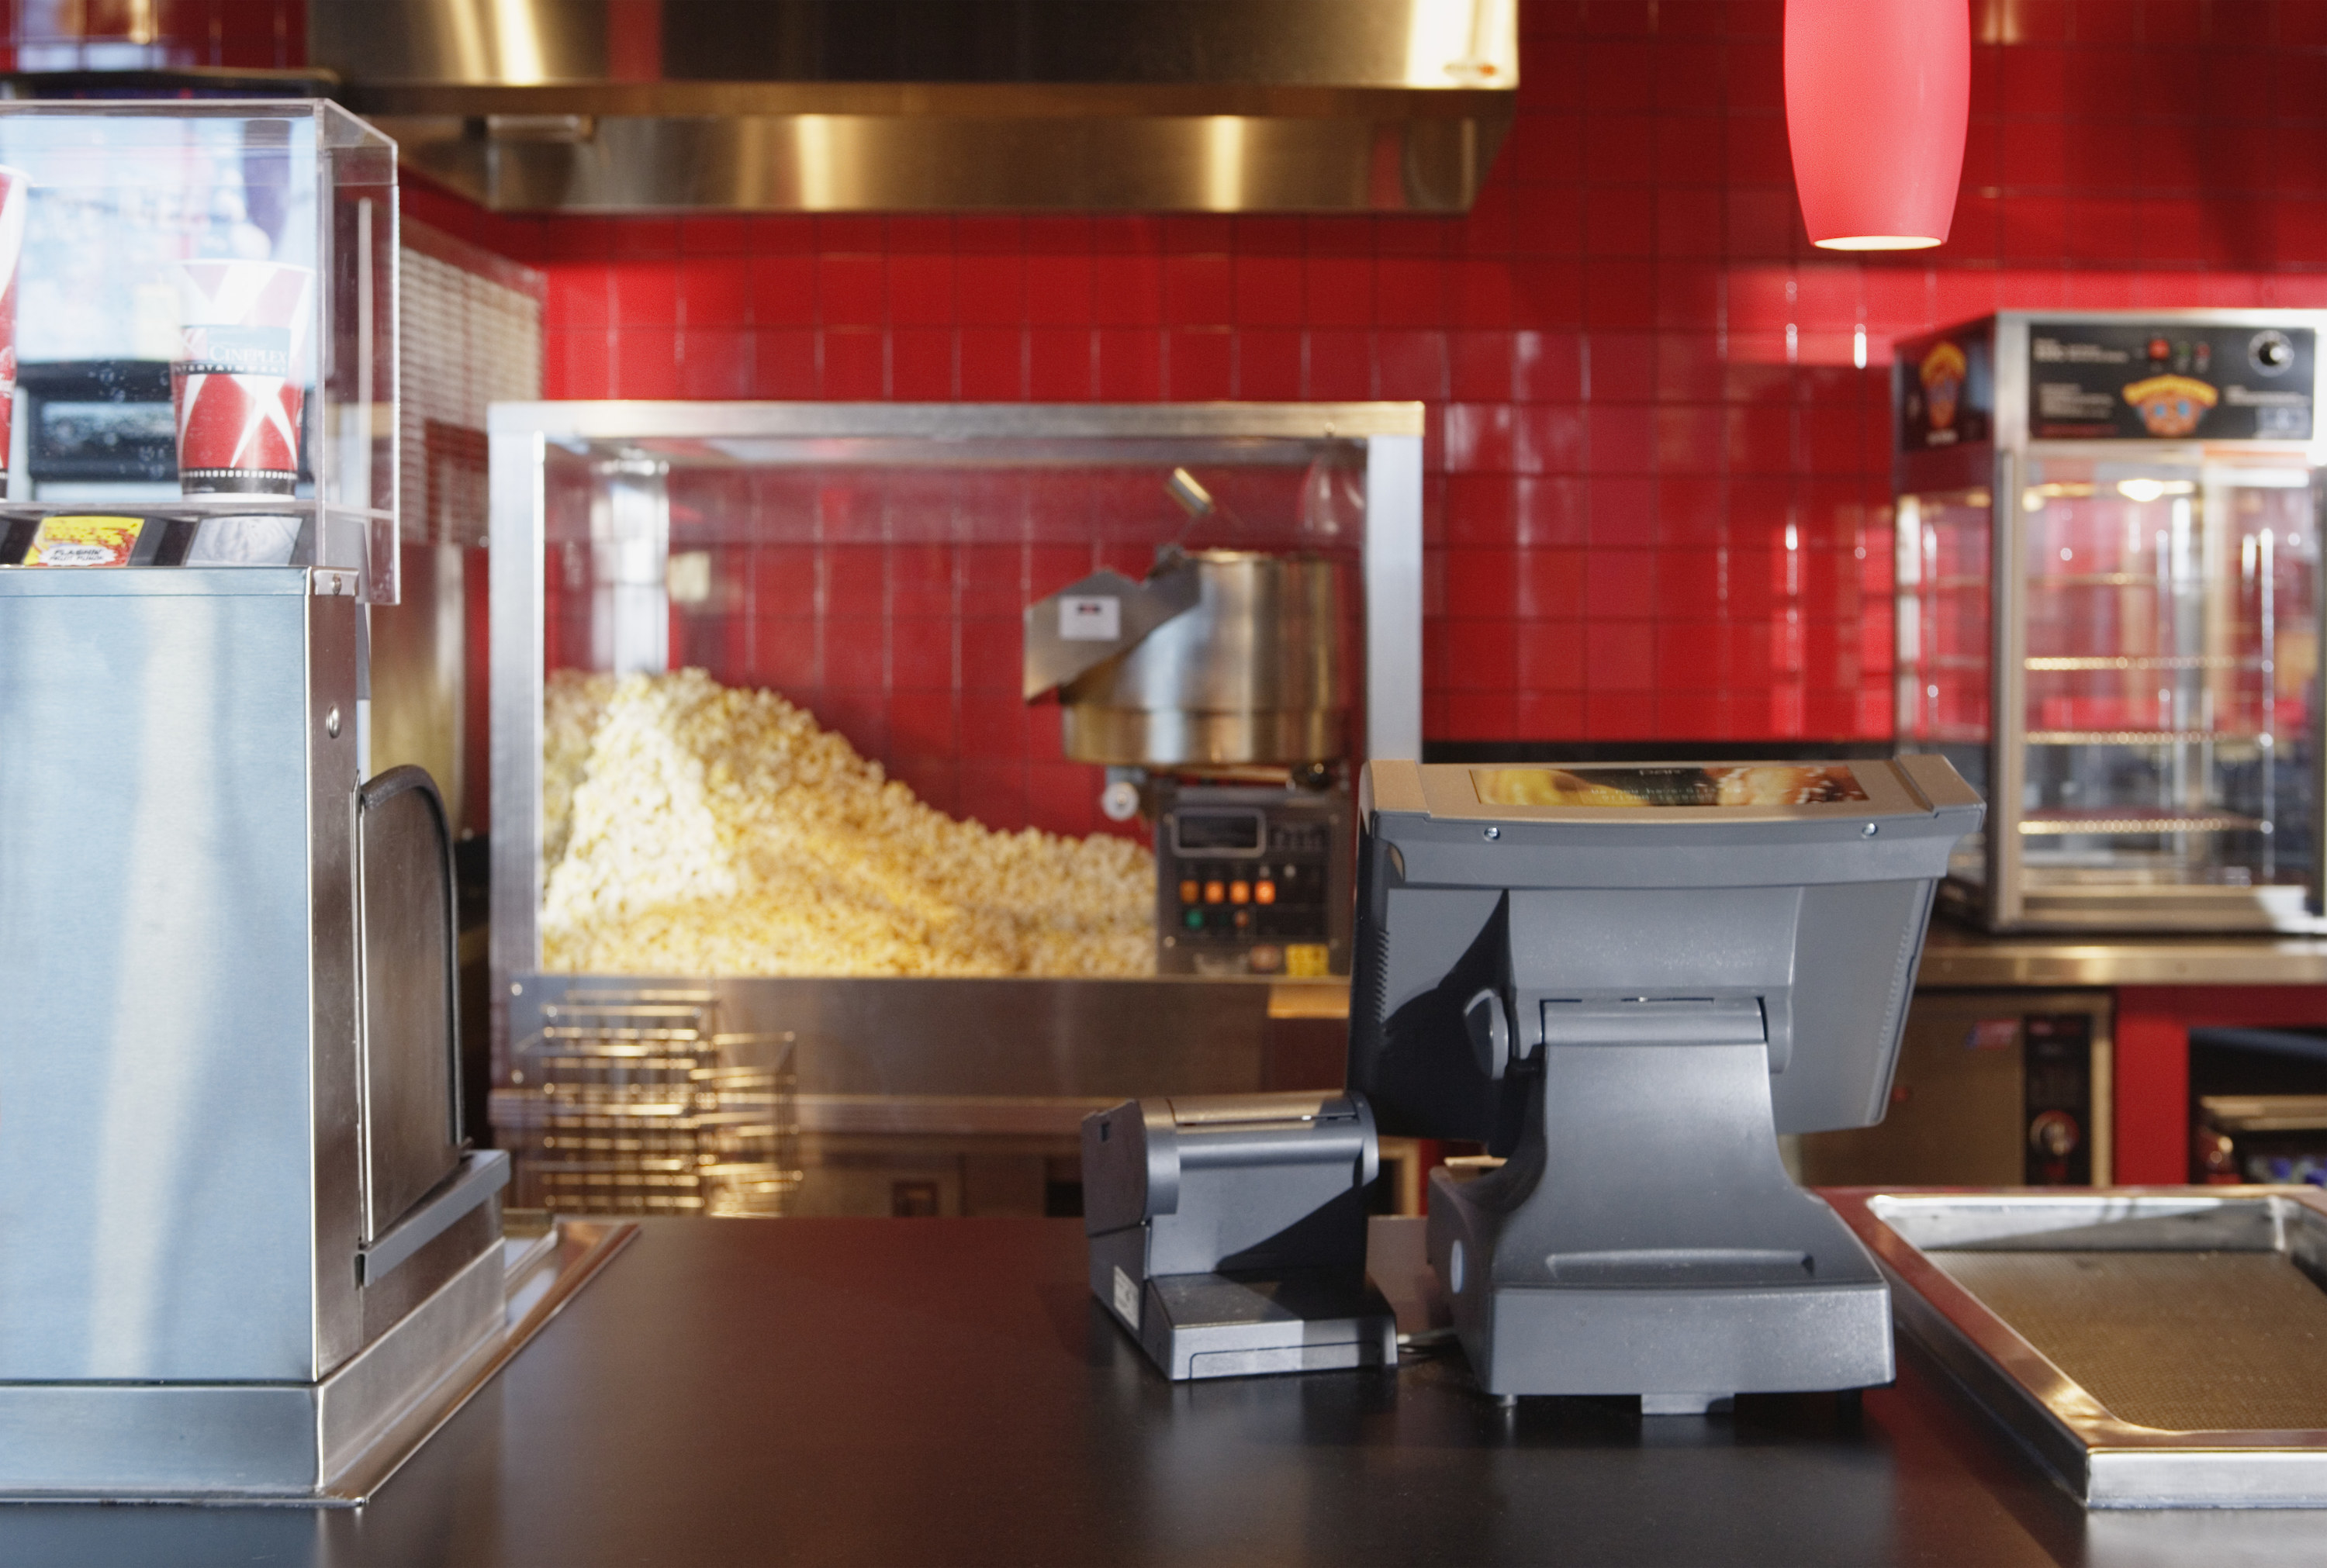 Movie theater concession stand